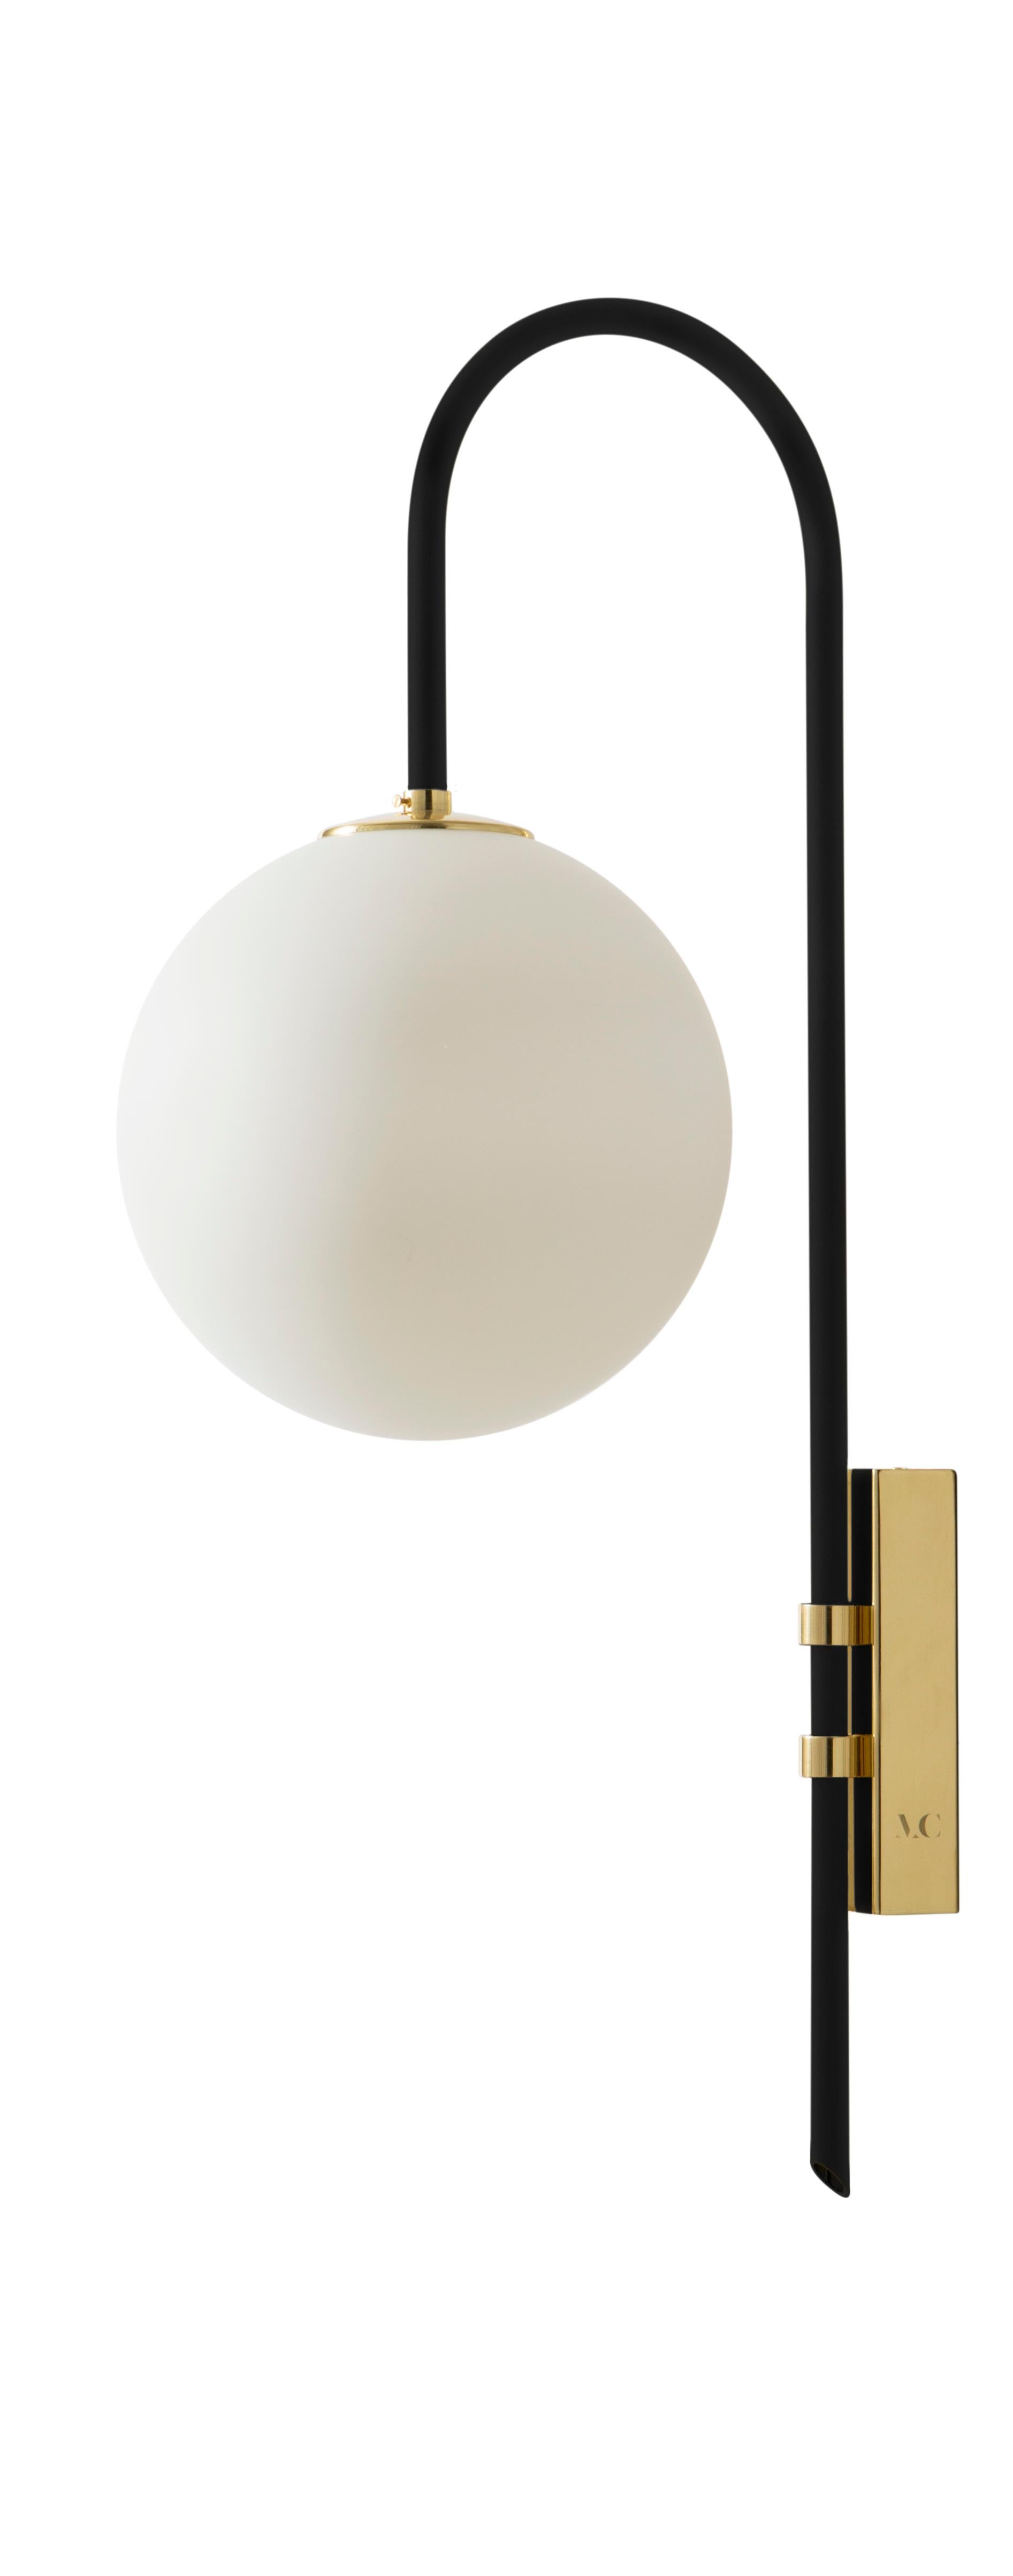 Black brass wall lamp 06 by Magic Circus Editions.
Dimensions: H 77 x W 25 x D 36.5 cm.
Materials: smooth brass, mouth blown glass.
Sphere Dimensions: 25 cm.

Available finishes: brass, nickel.
All our lamps can be wired according to each